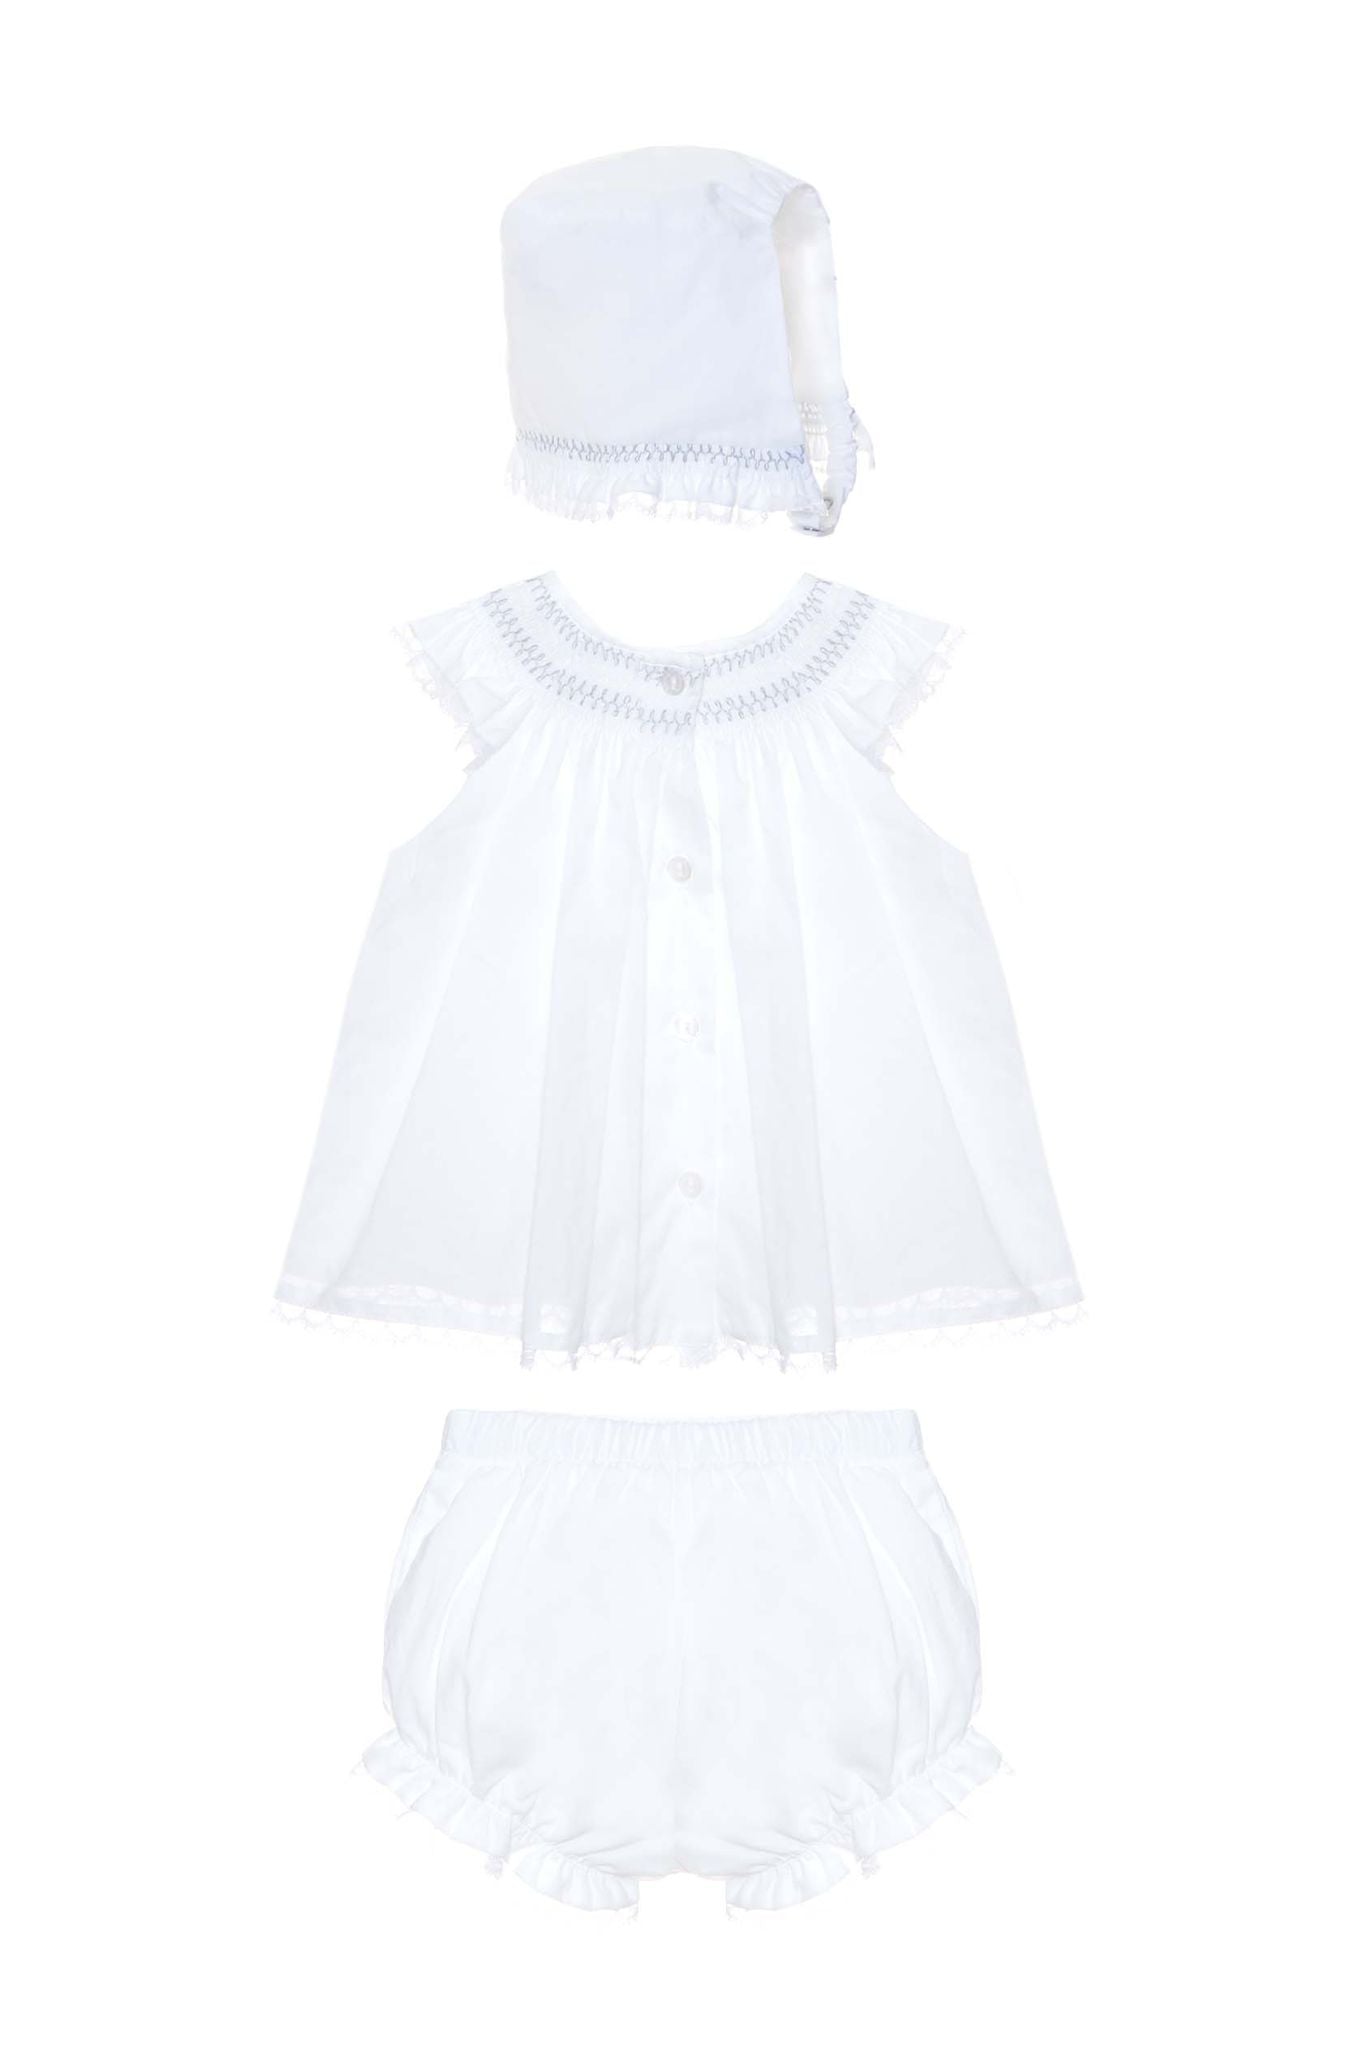 3 Piece Smocked Bloomer Set and Bonnet - White